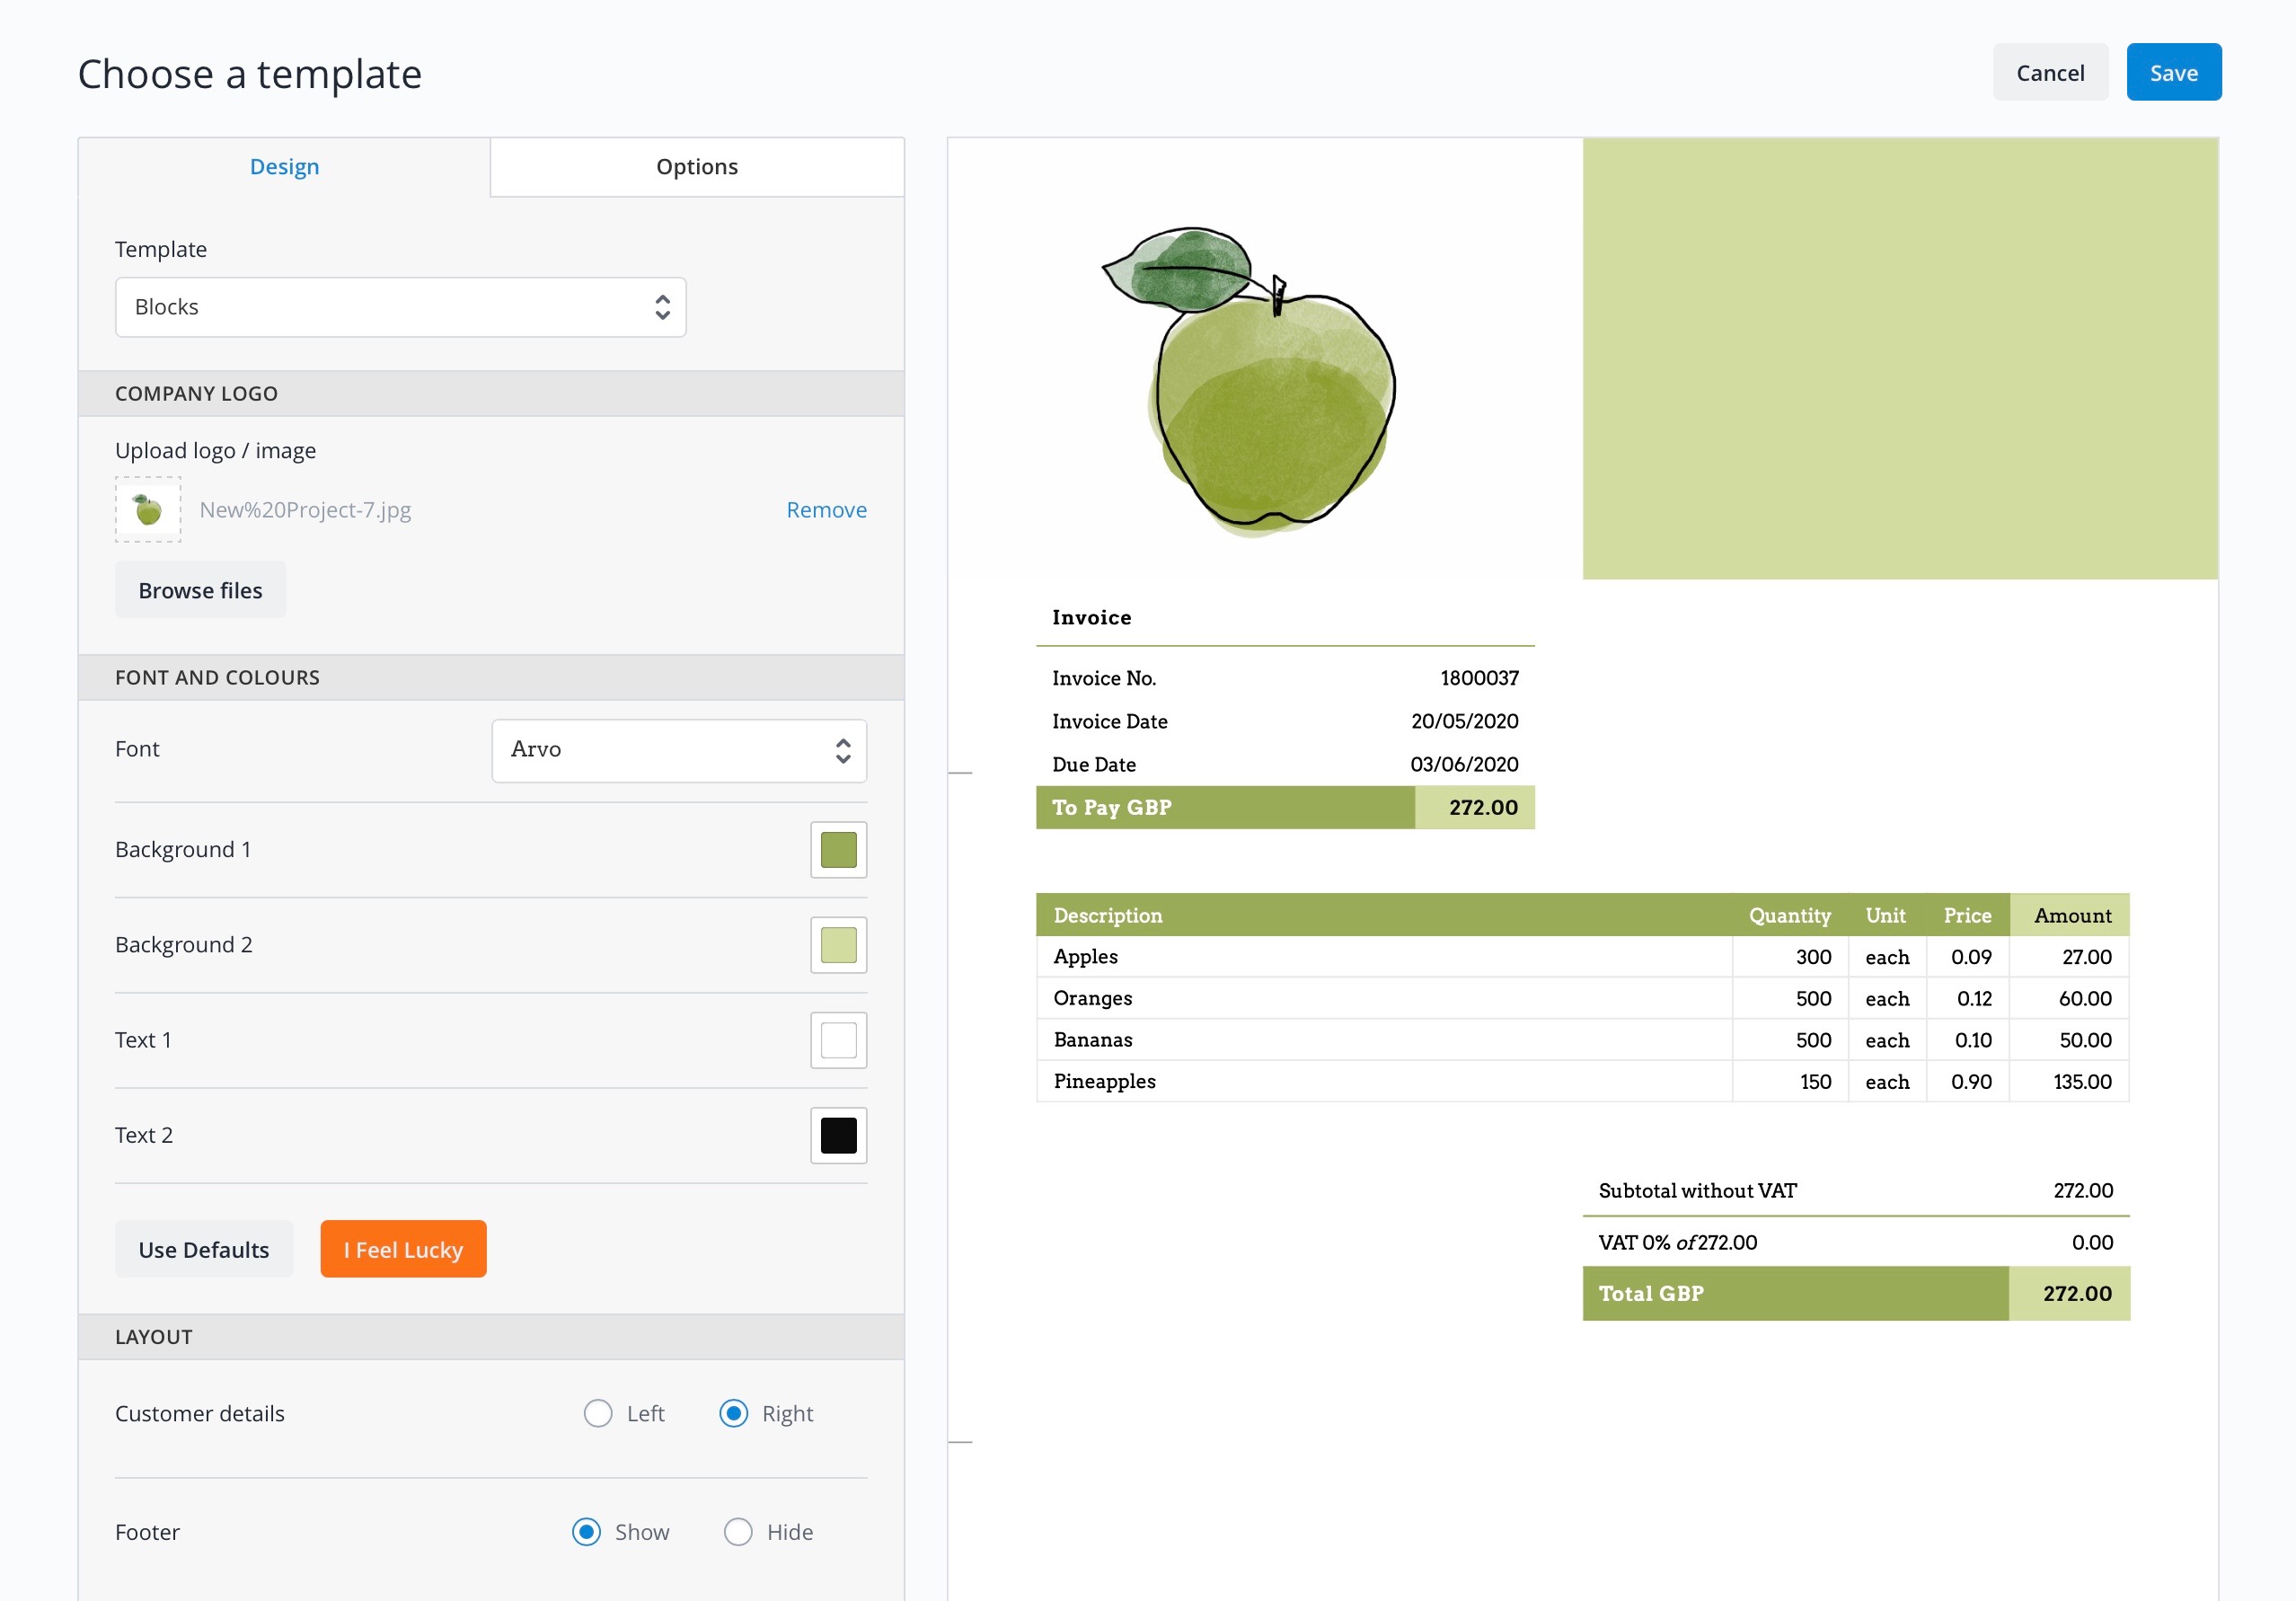 You can change the colour scheme of your invoices to match your company logo